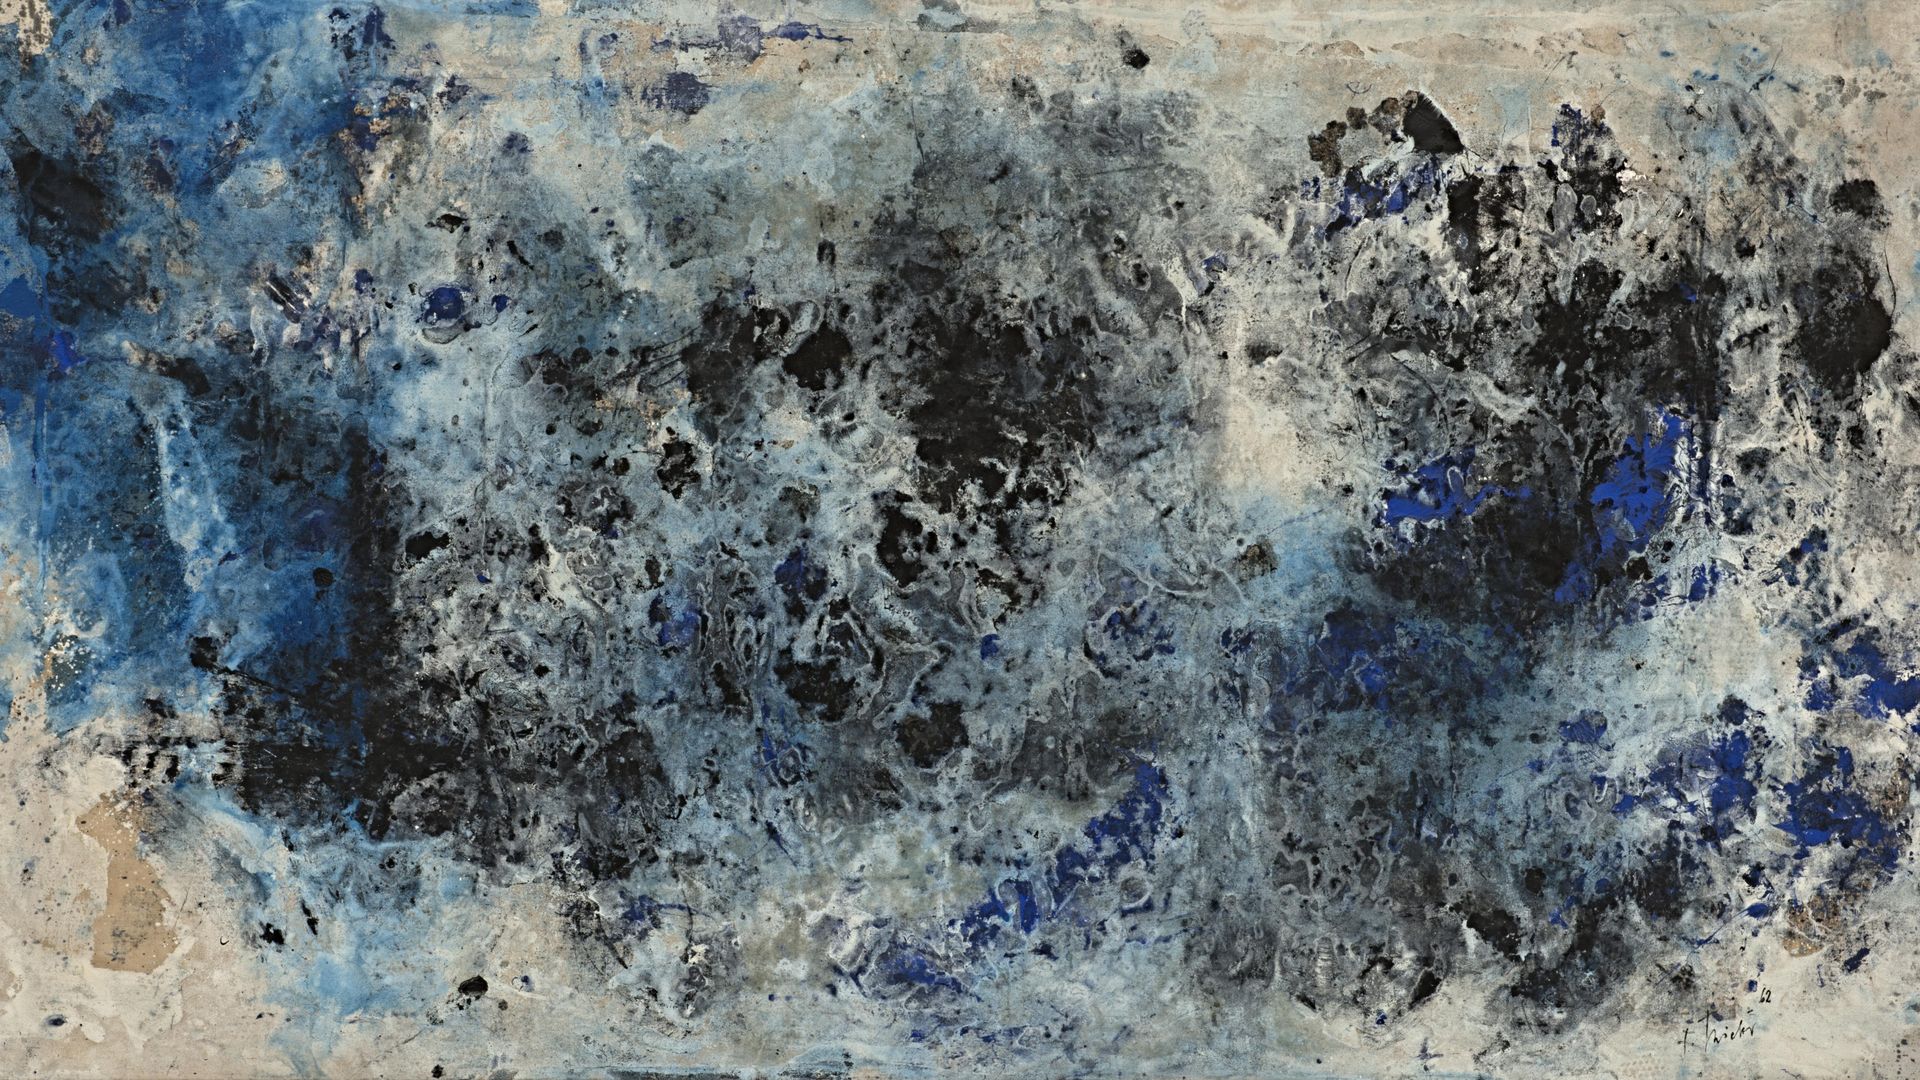 painting by Fred Thieler, Mixed Media on canvas, 160 x 315 cm 